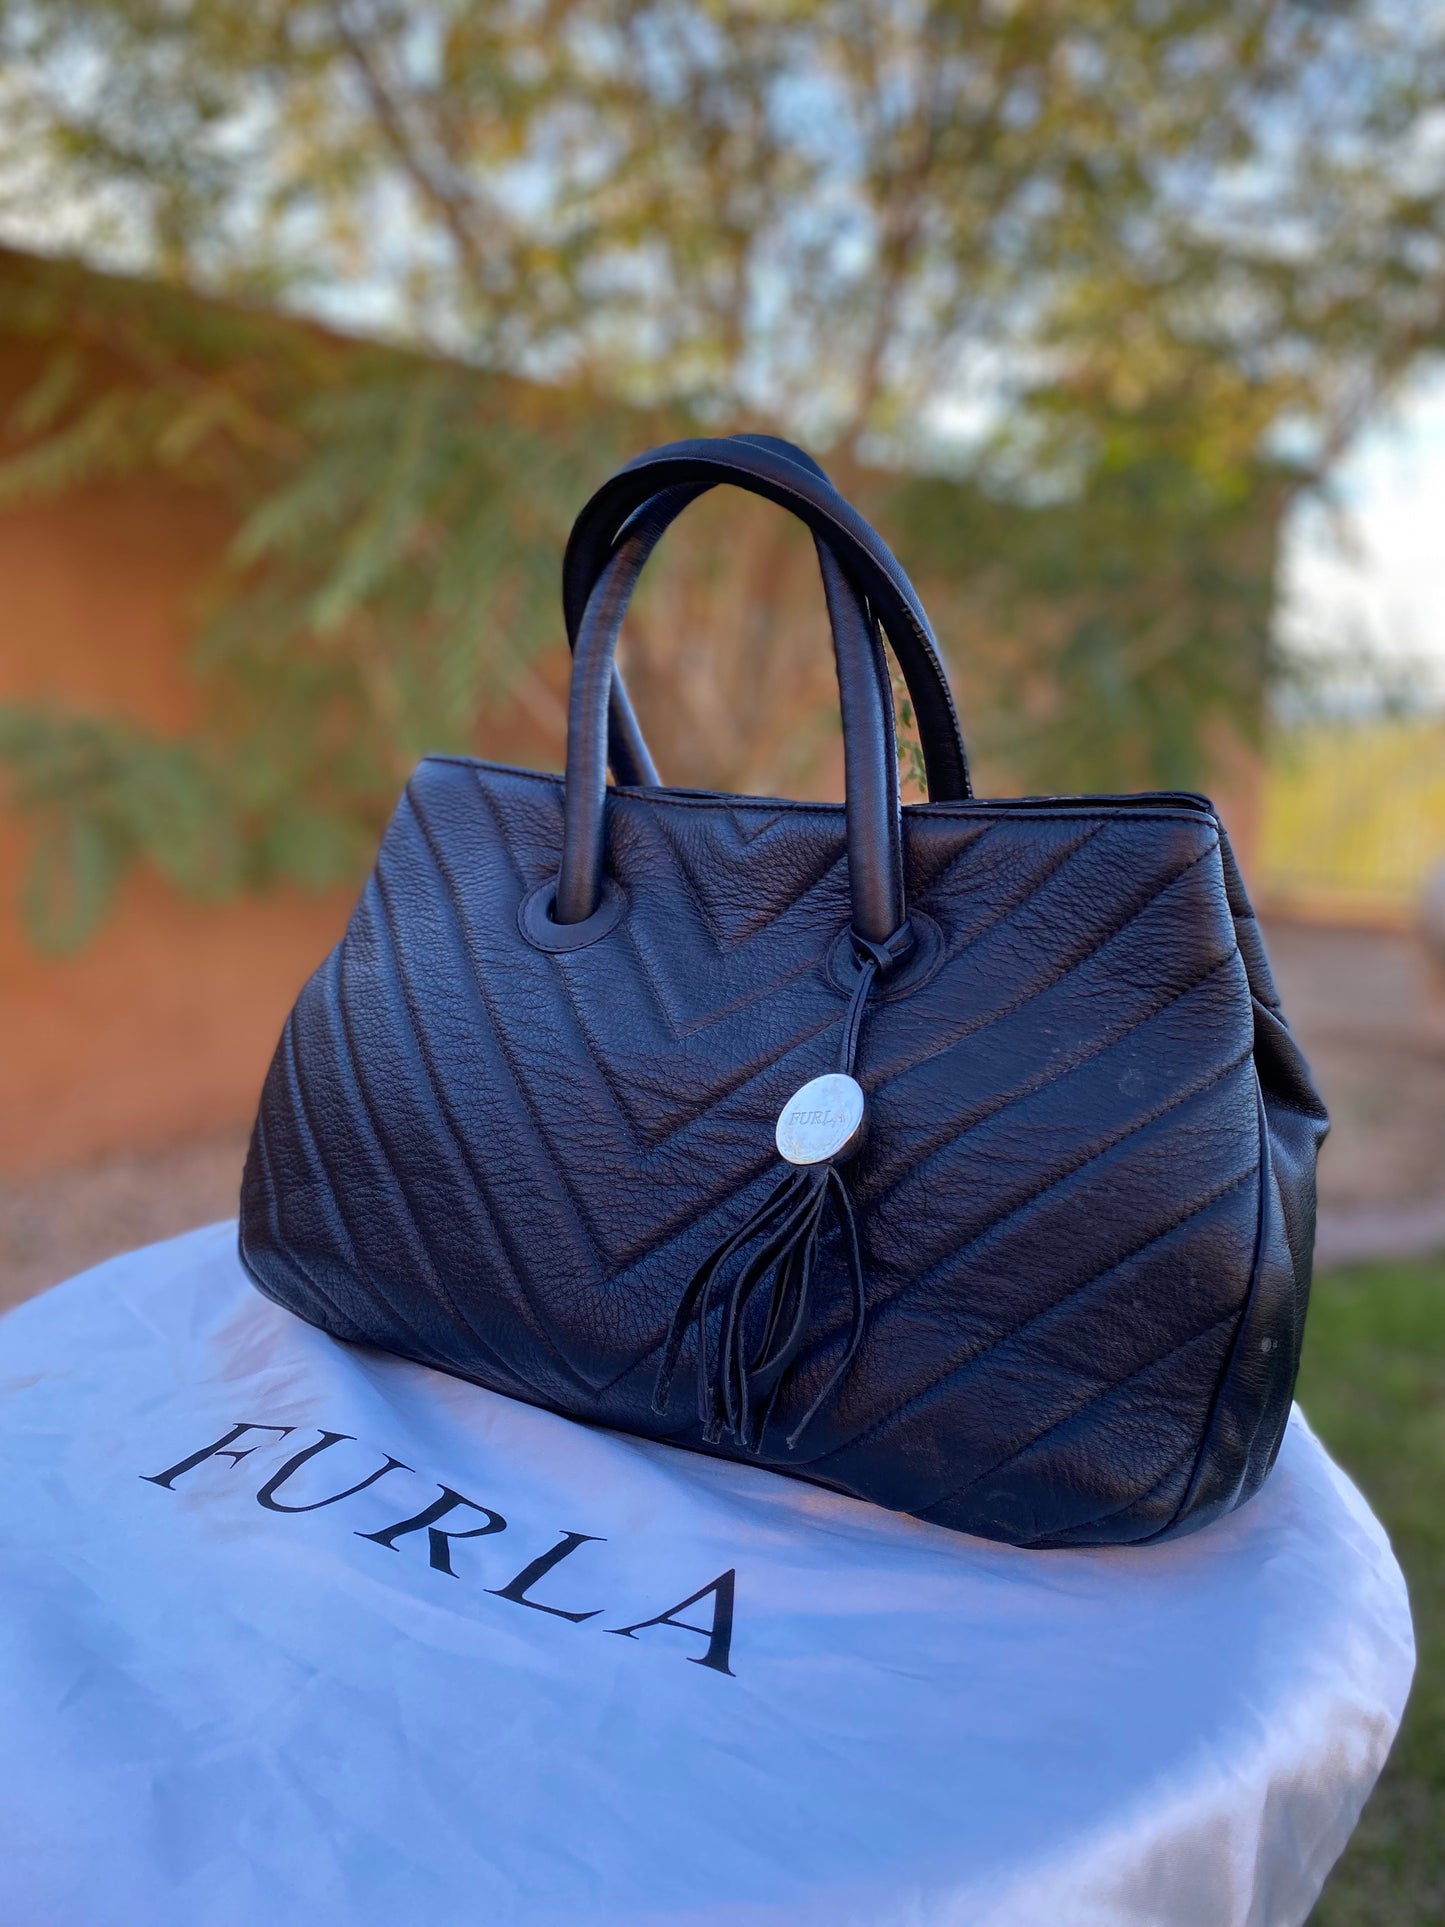 Furla Quilted Chevron Pattern Leather Satchel